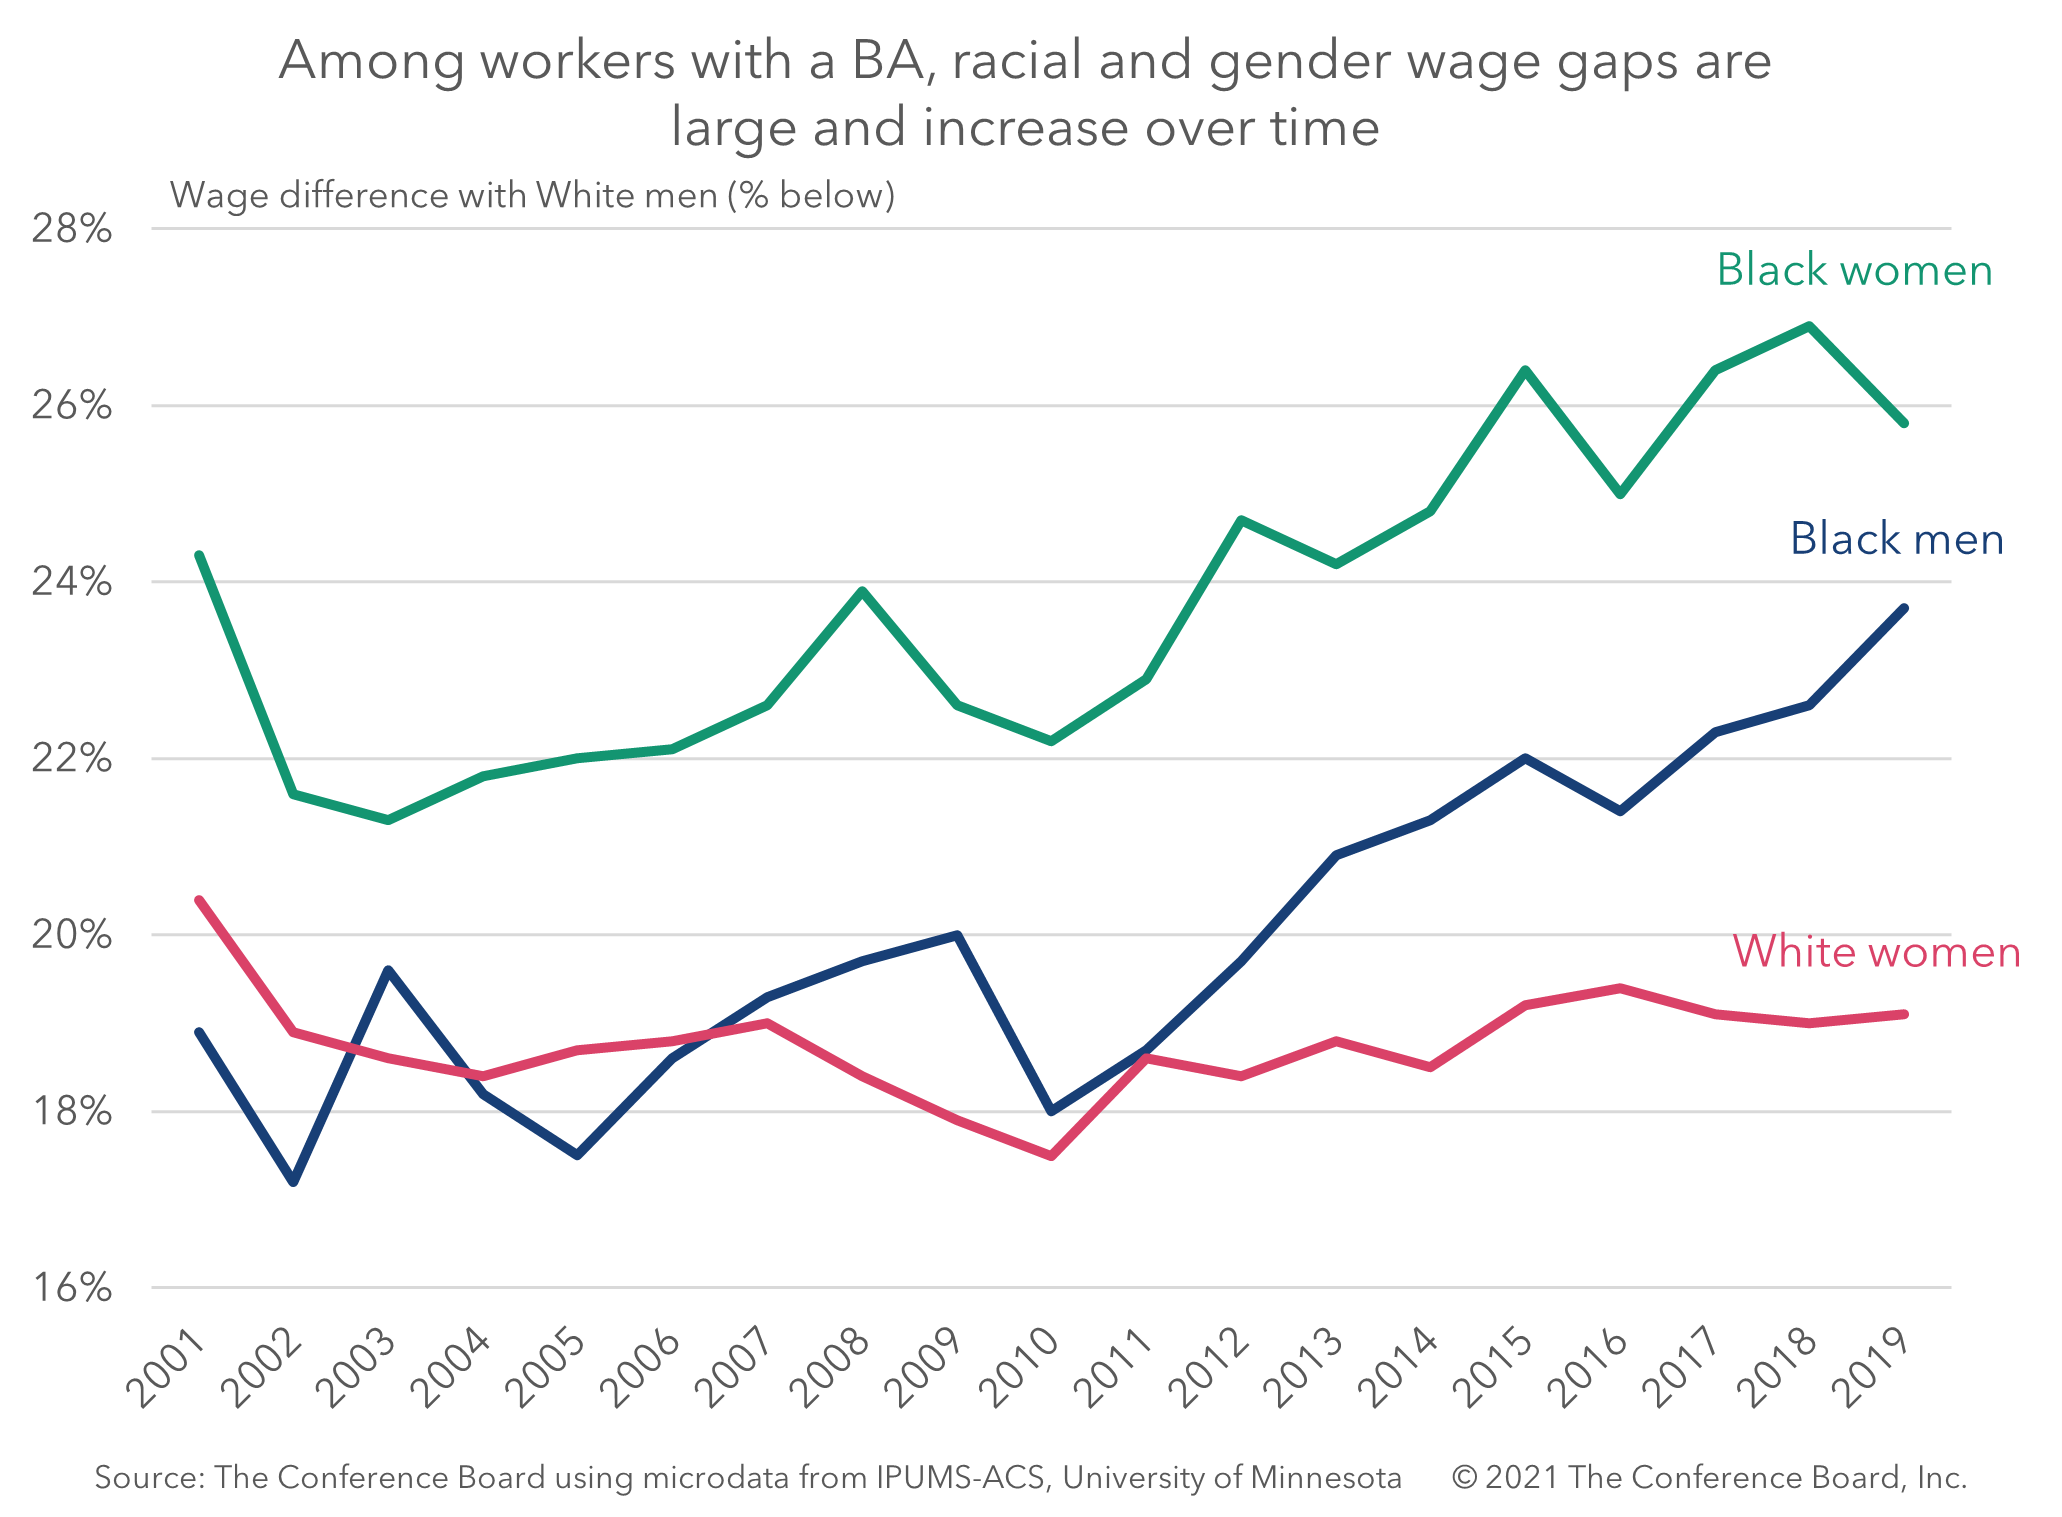 Among workers with a BA, racial and gender wage gaps are large and increase over time